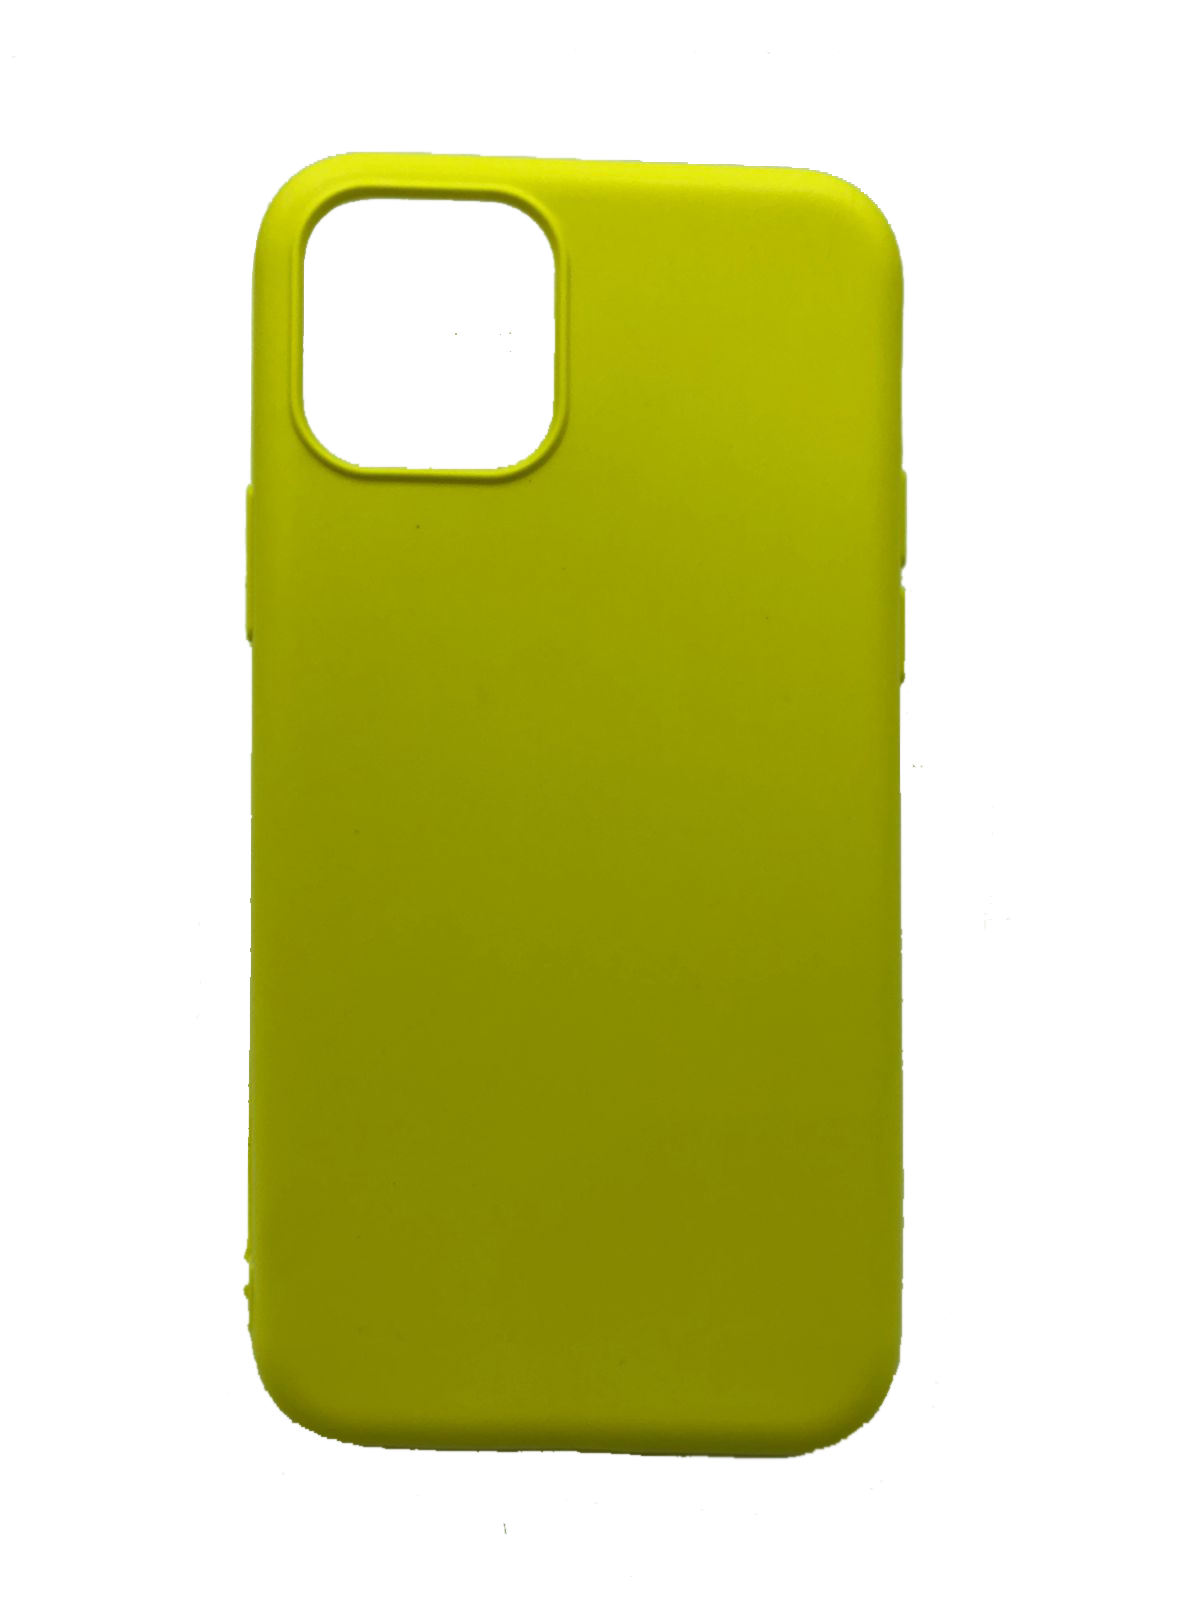 Silicone Case iPHONE 11 PRO YELLOW